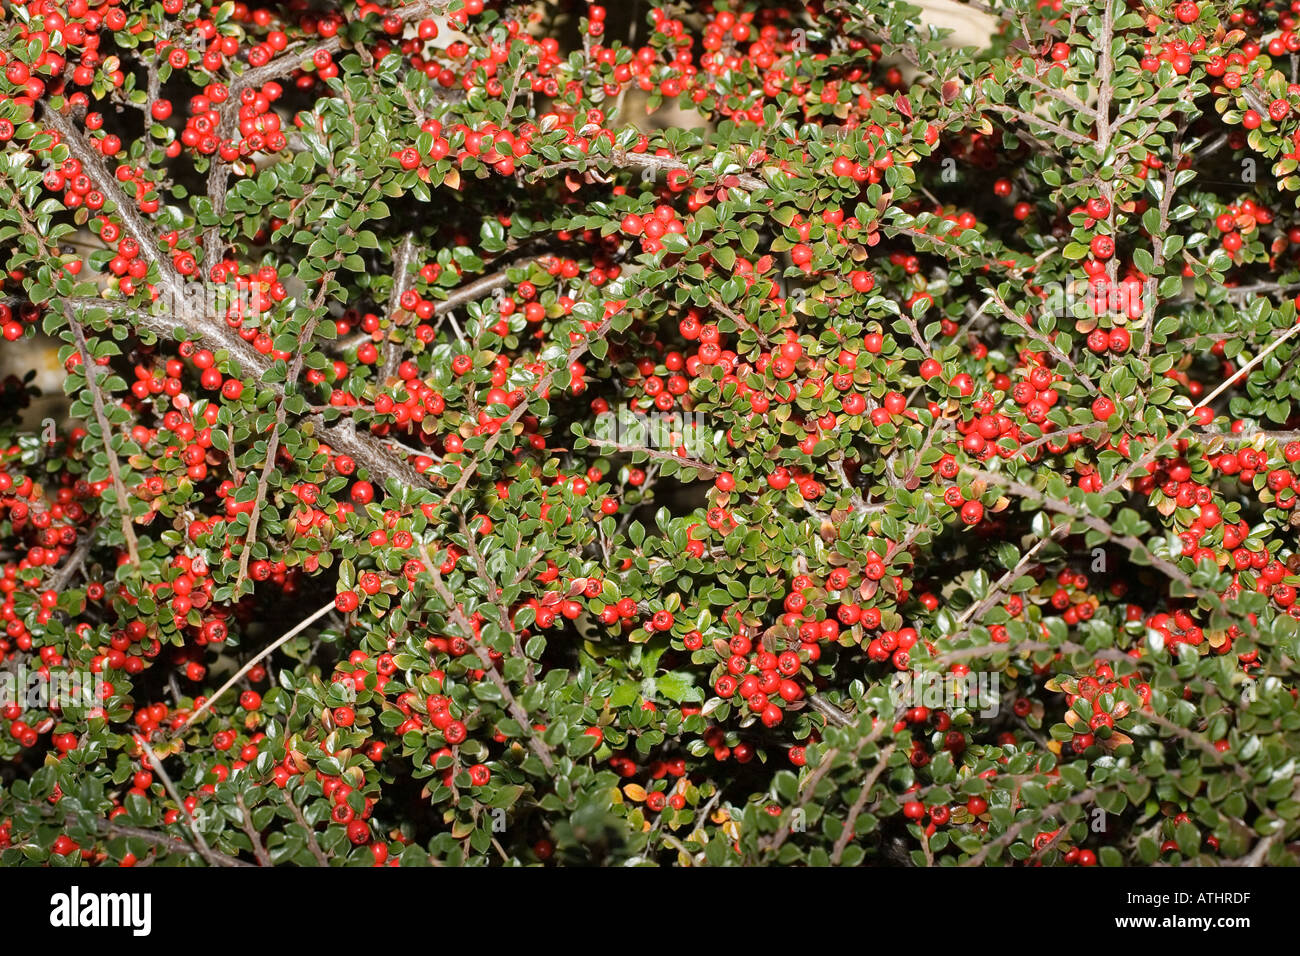 Abundant red berries on Cotoneaster plant Cotswolds Stock Photo